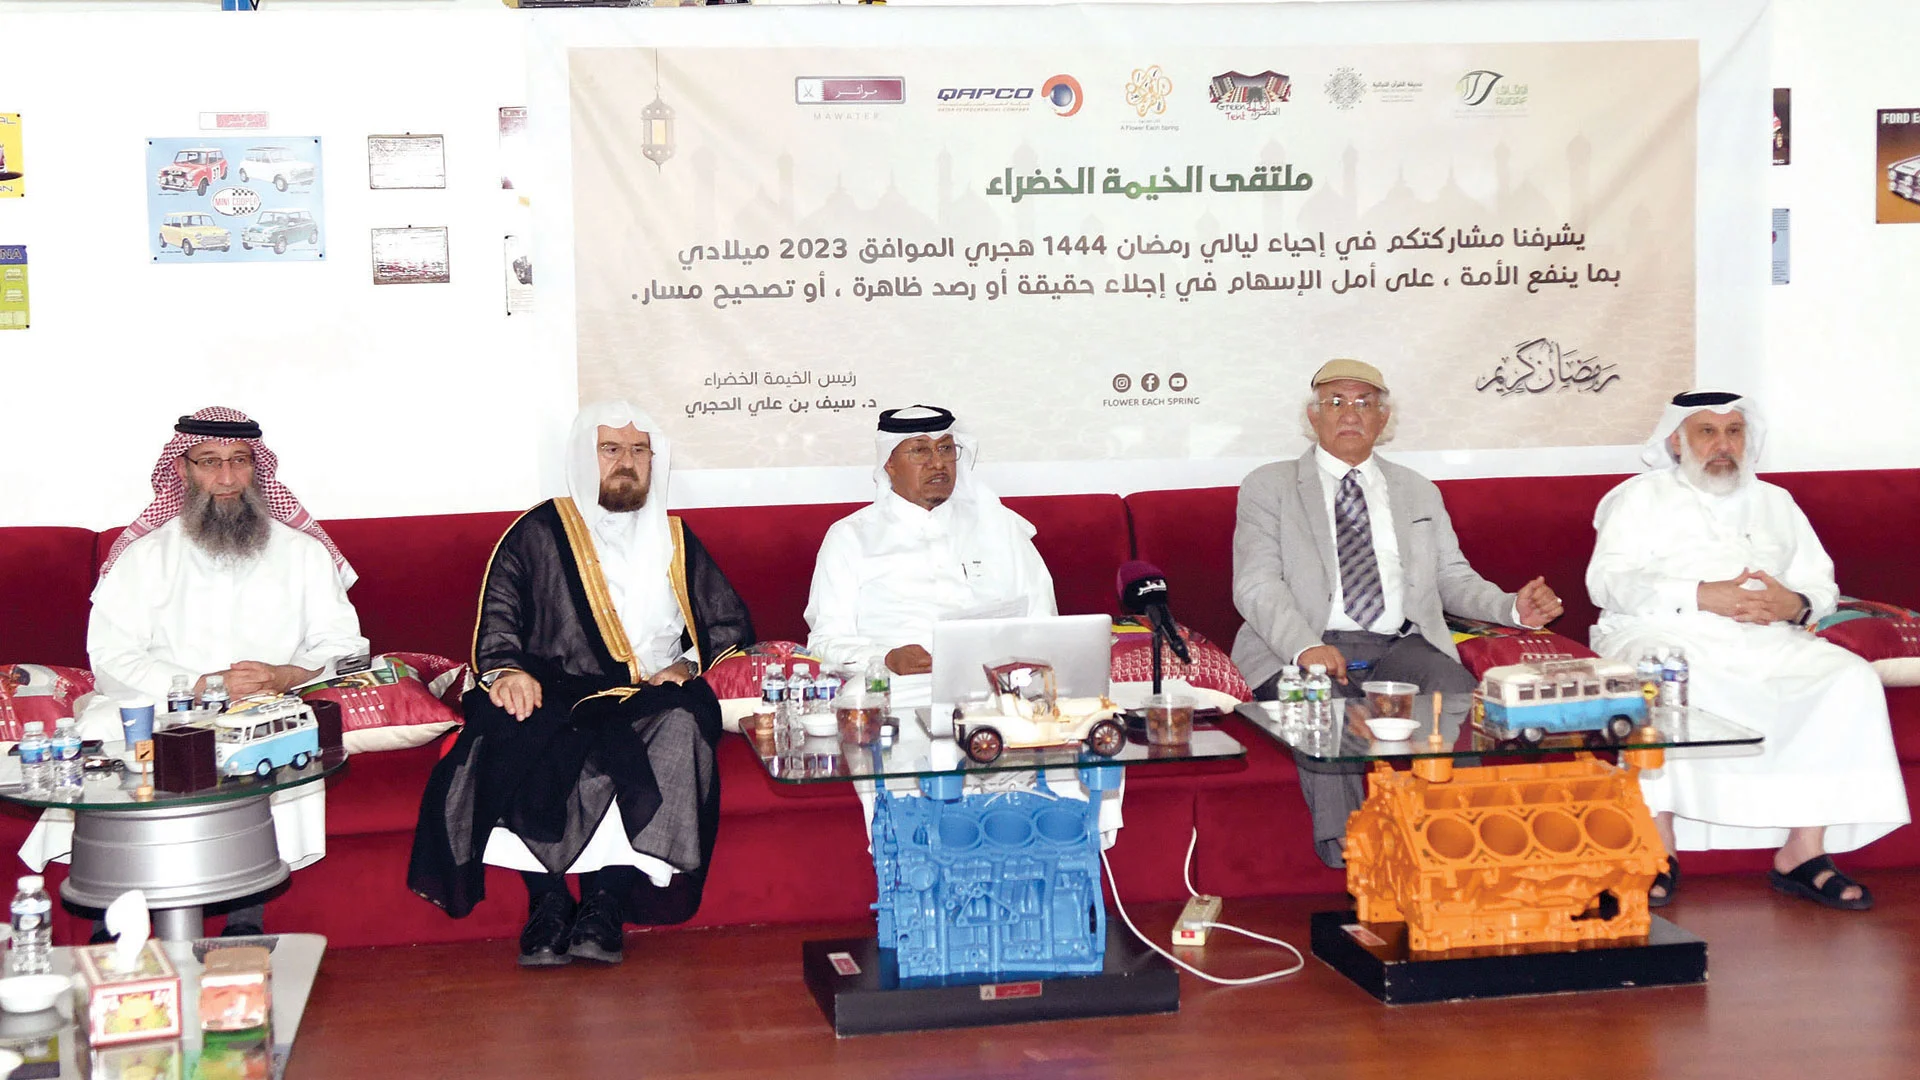 Green Tent Calls for Development of Endowments to Align with Modern Times